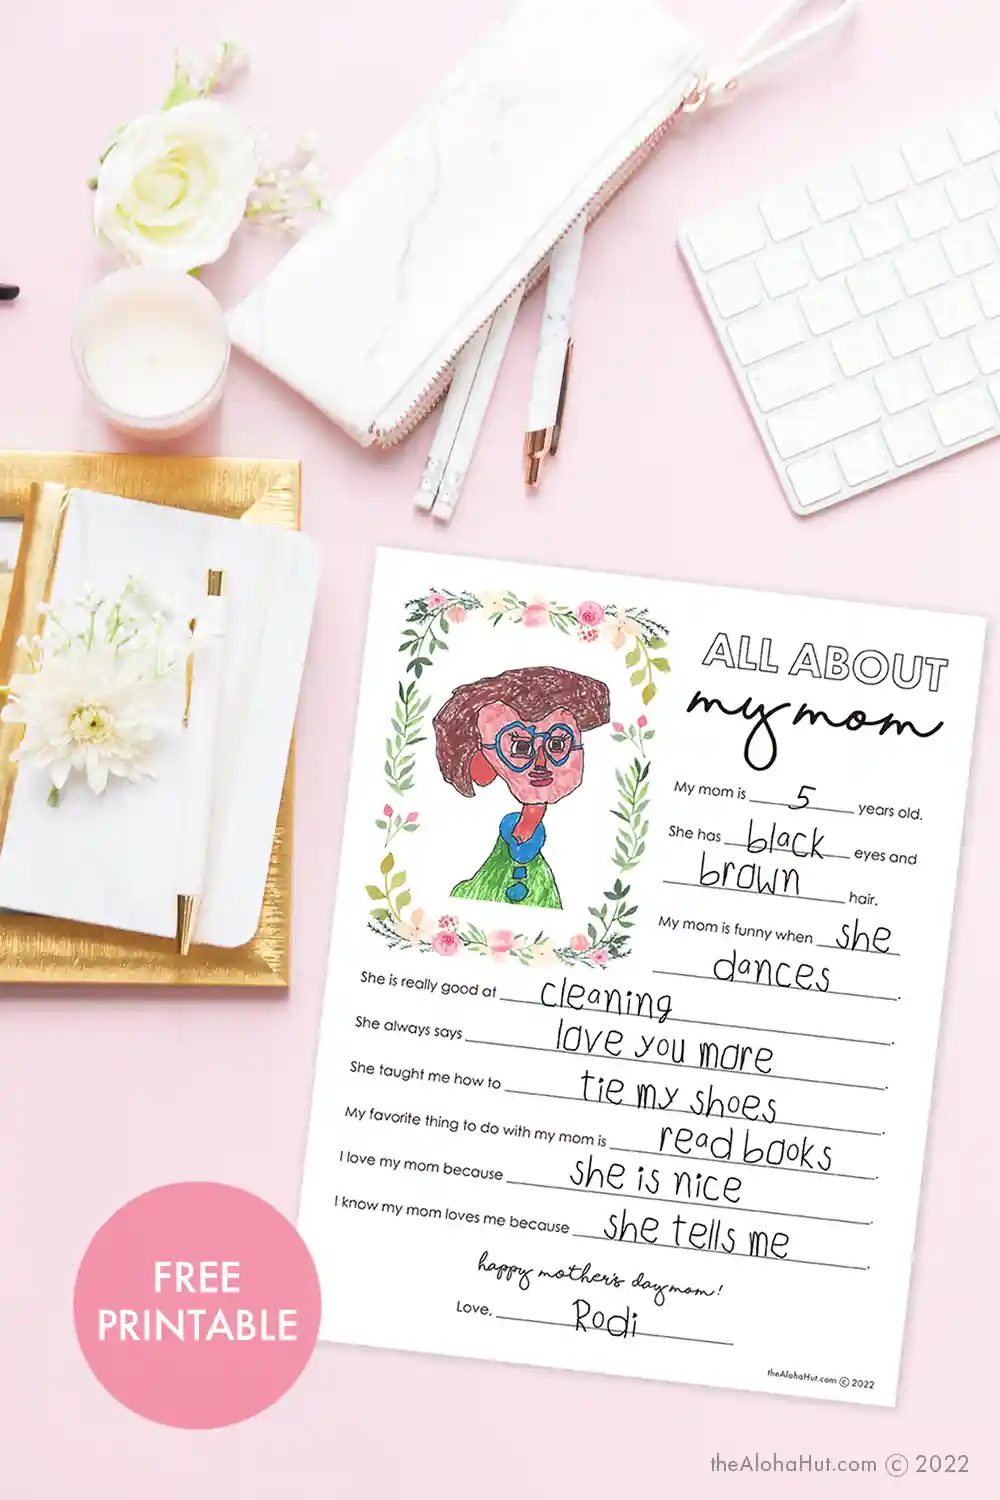 Mother's Day Cards & Questionnaire